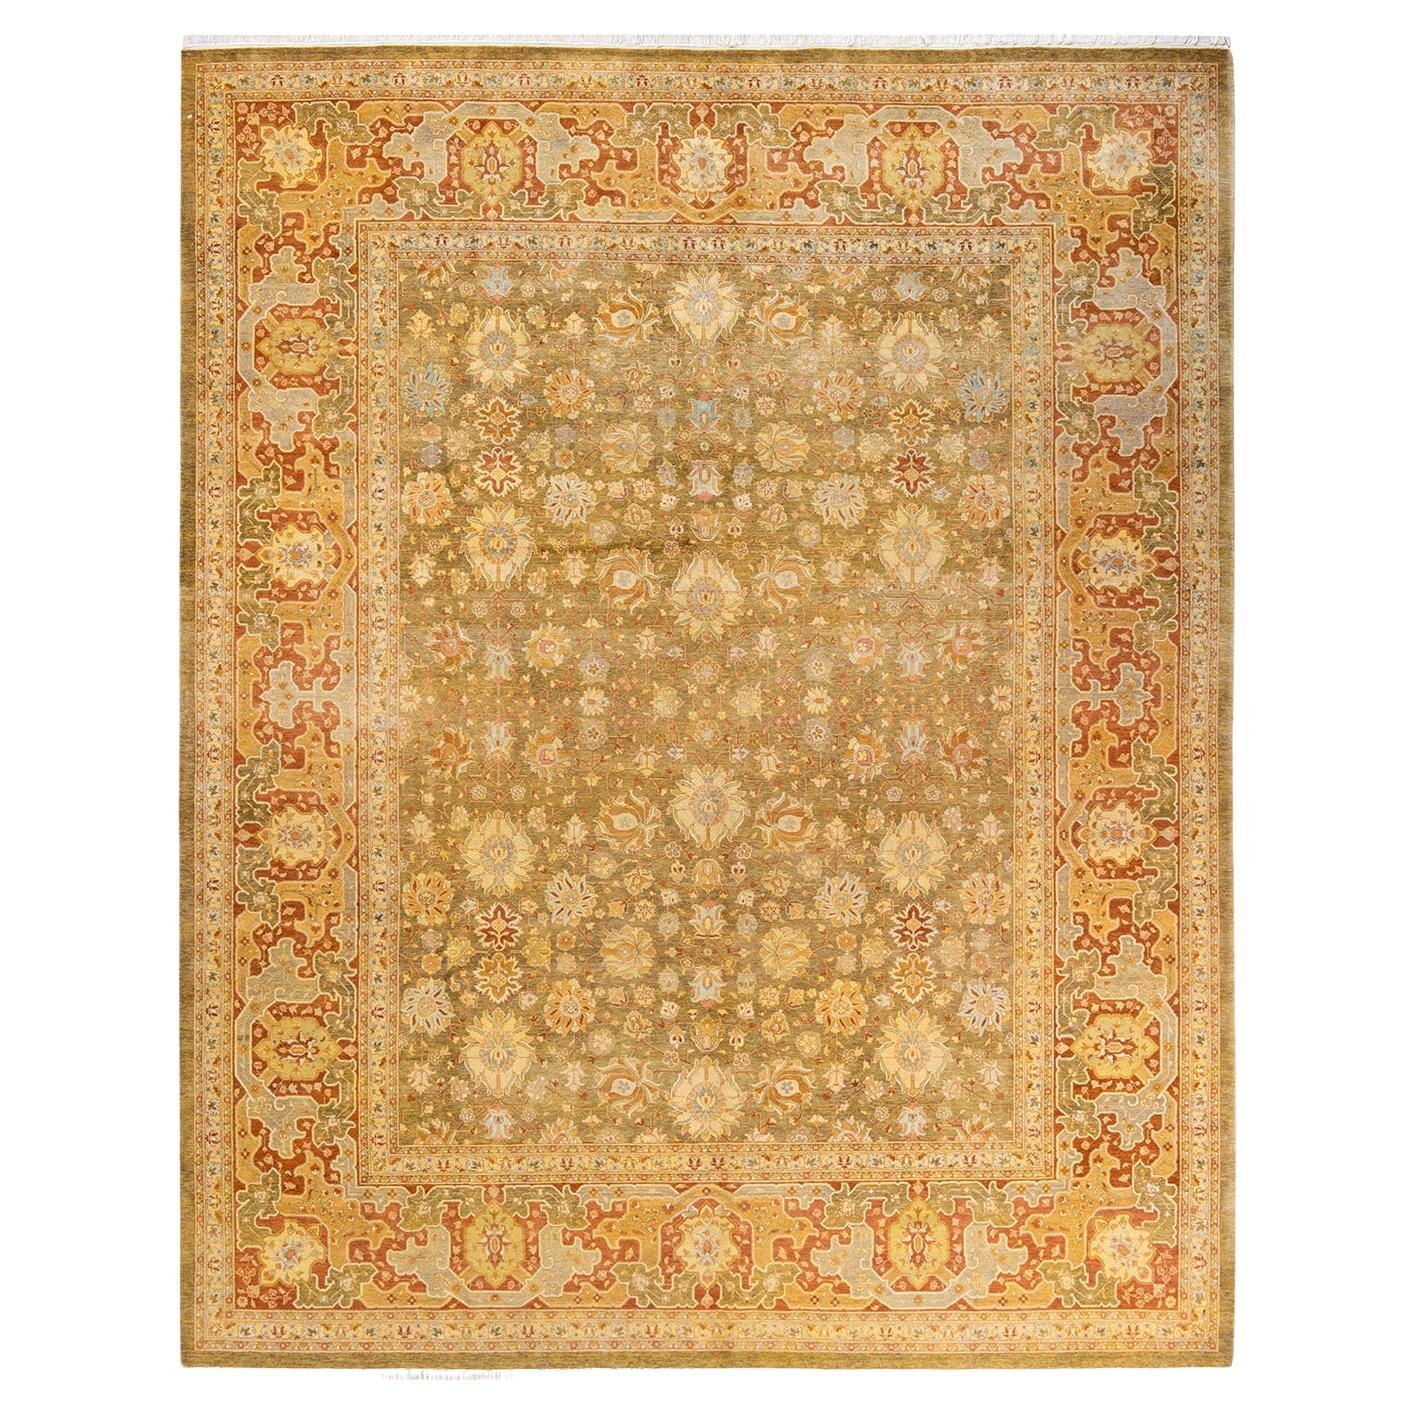 One-of-a-kind Hand Knotted Floral Mogul Green Area Rug